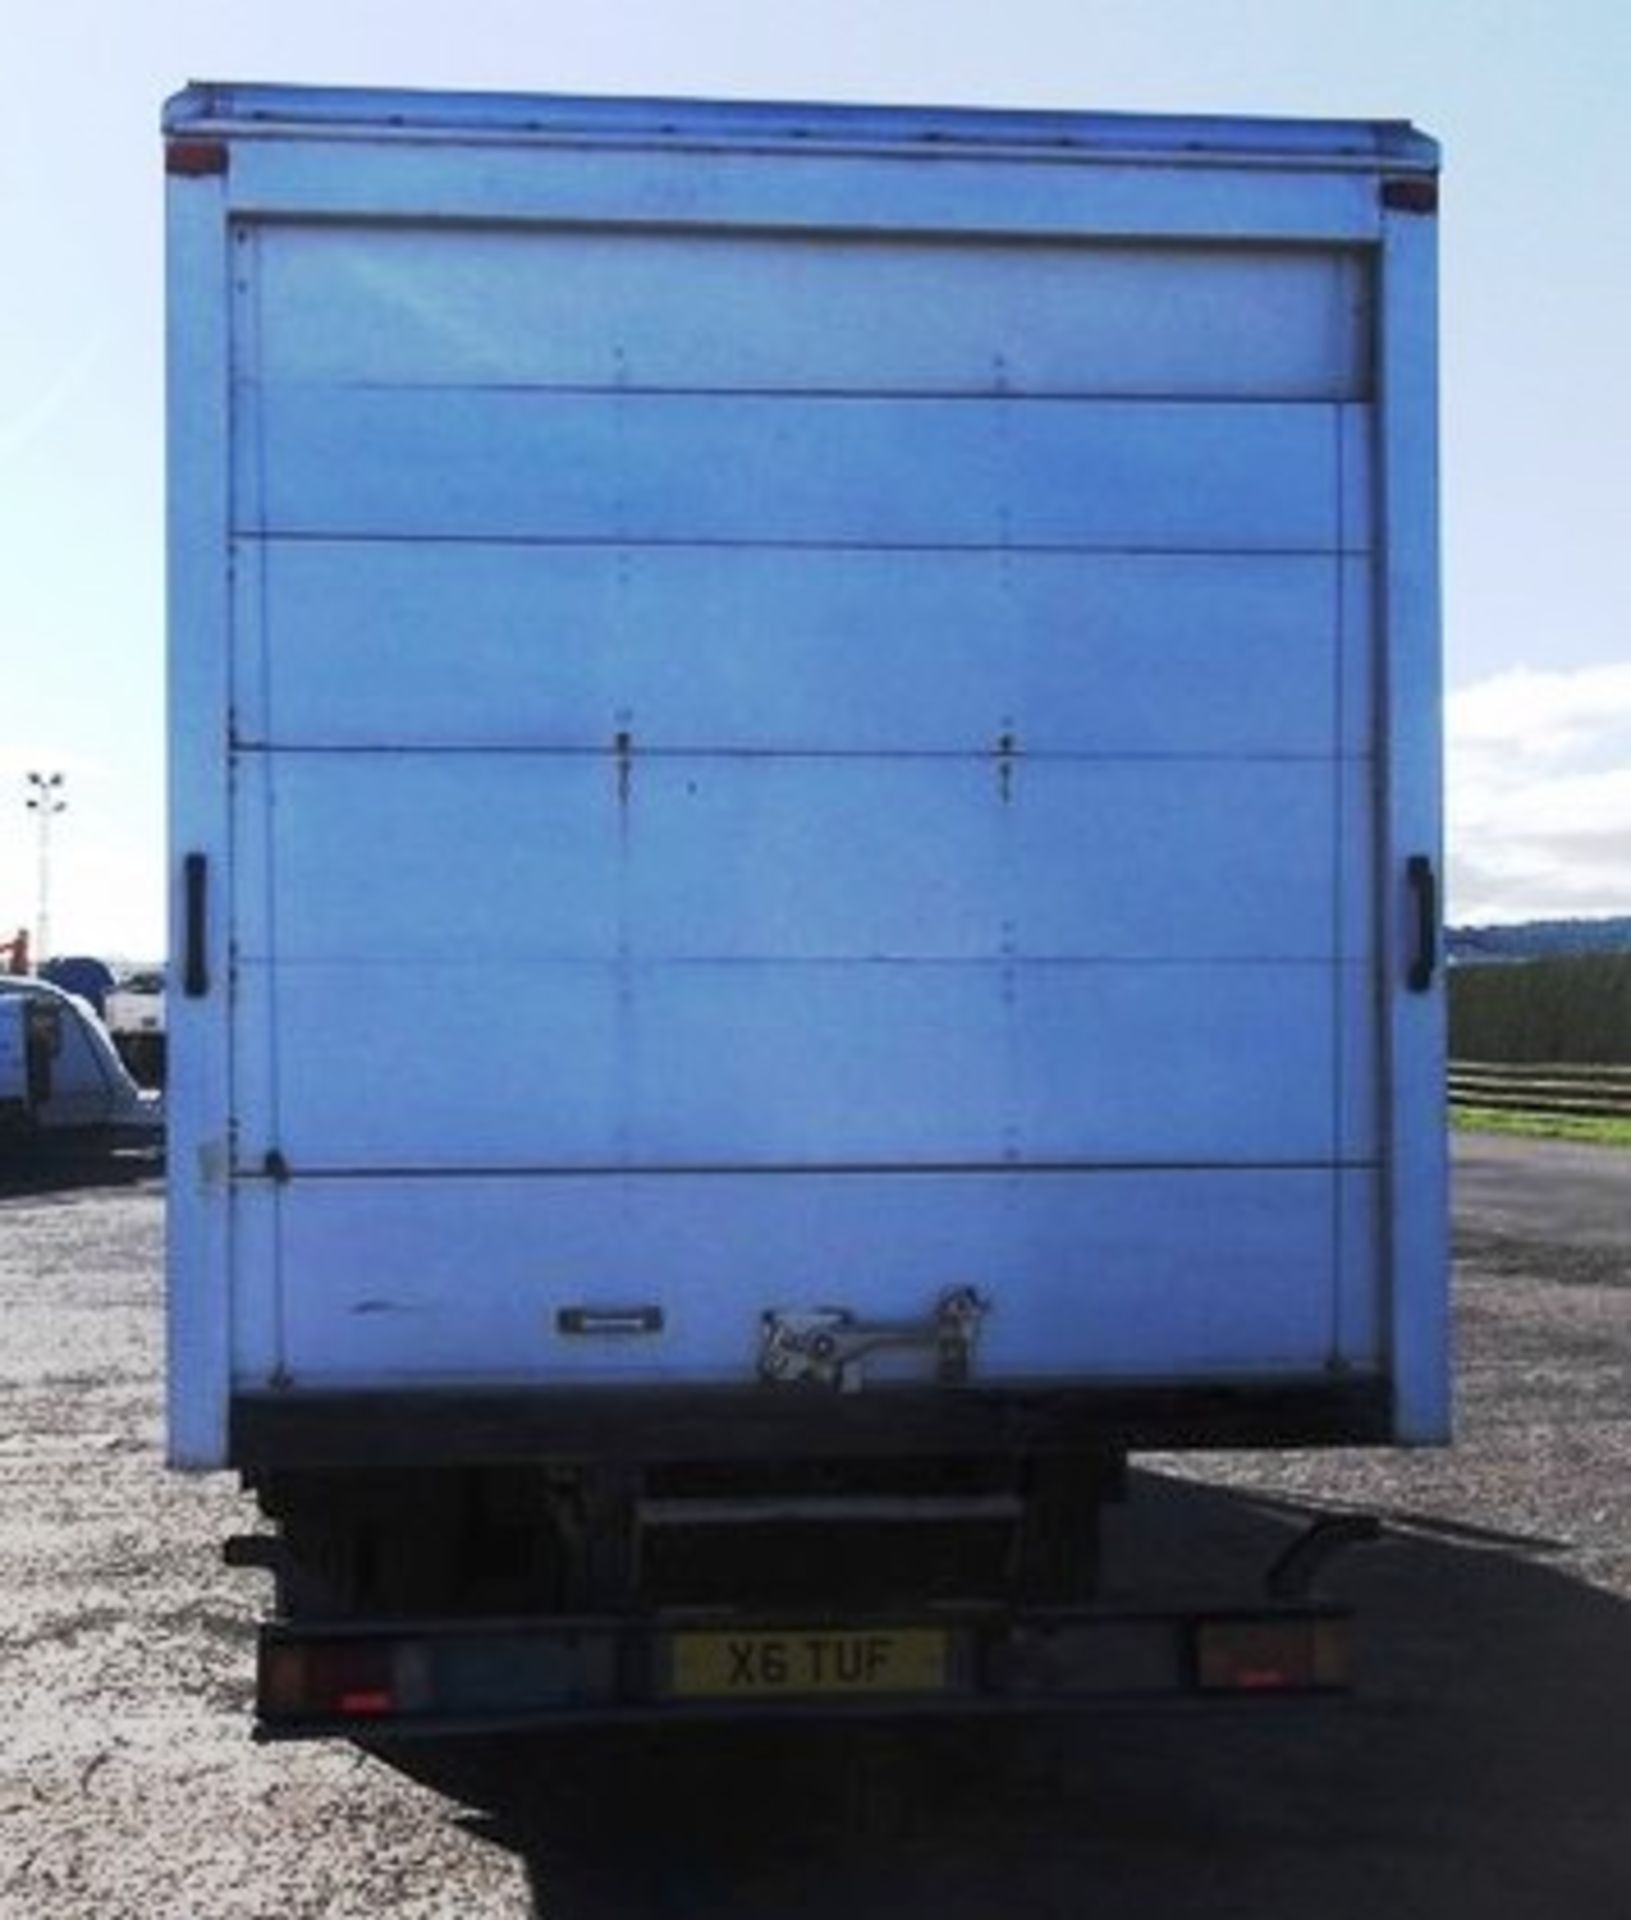 IVECO-FORD CARGO TECTOR - 3920cc
Body: 2 Dr Van
Color: White
First Reg: 05/03/2004
Doors: 2
MOT: - Image 13 of 20